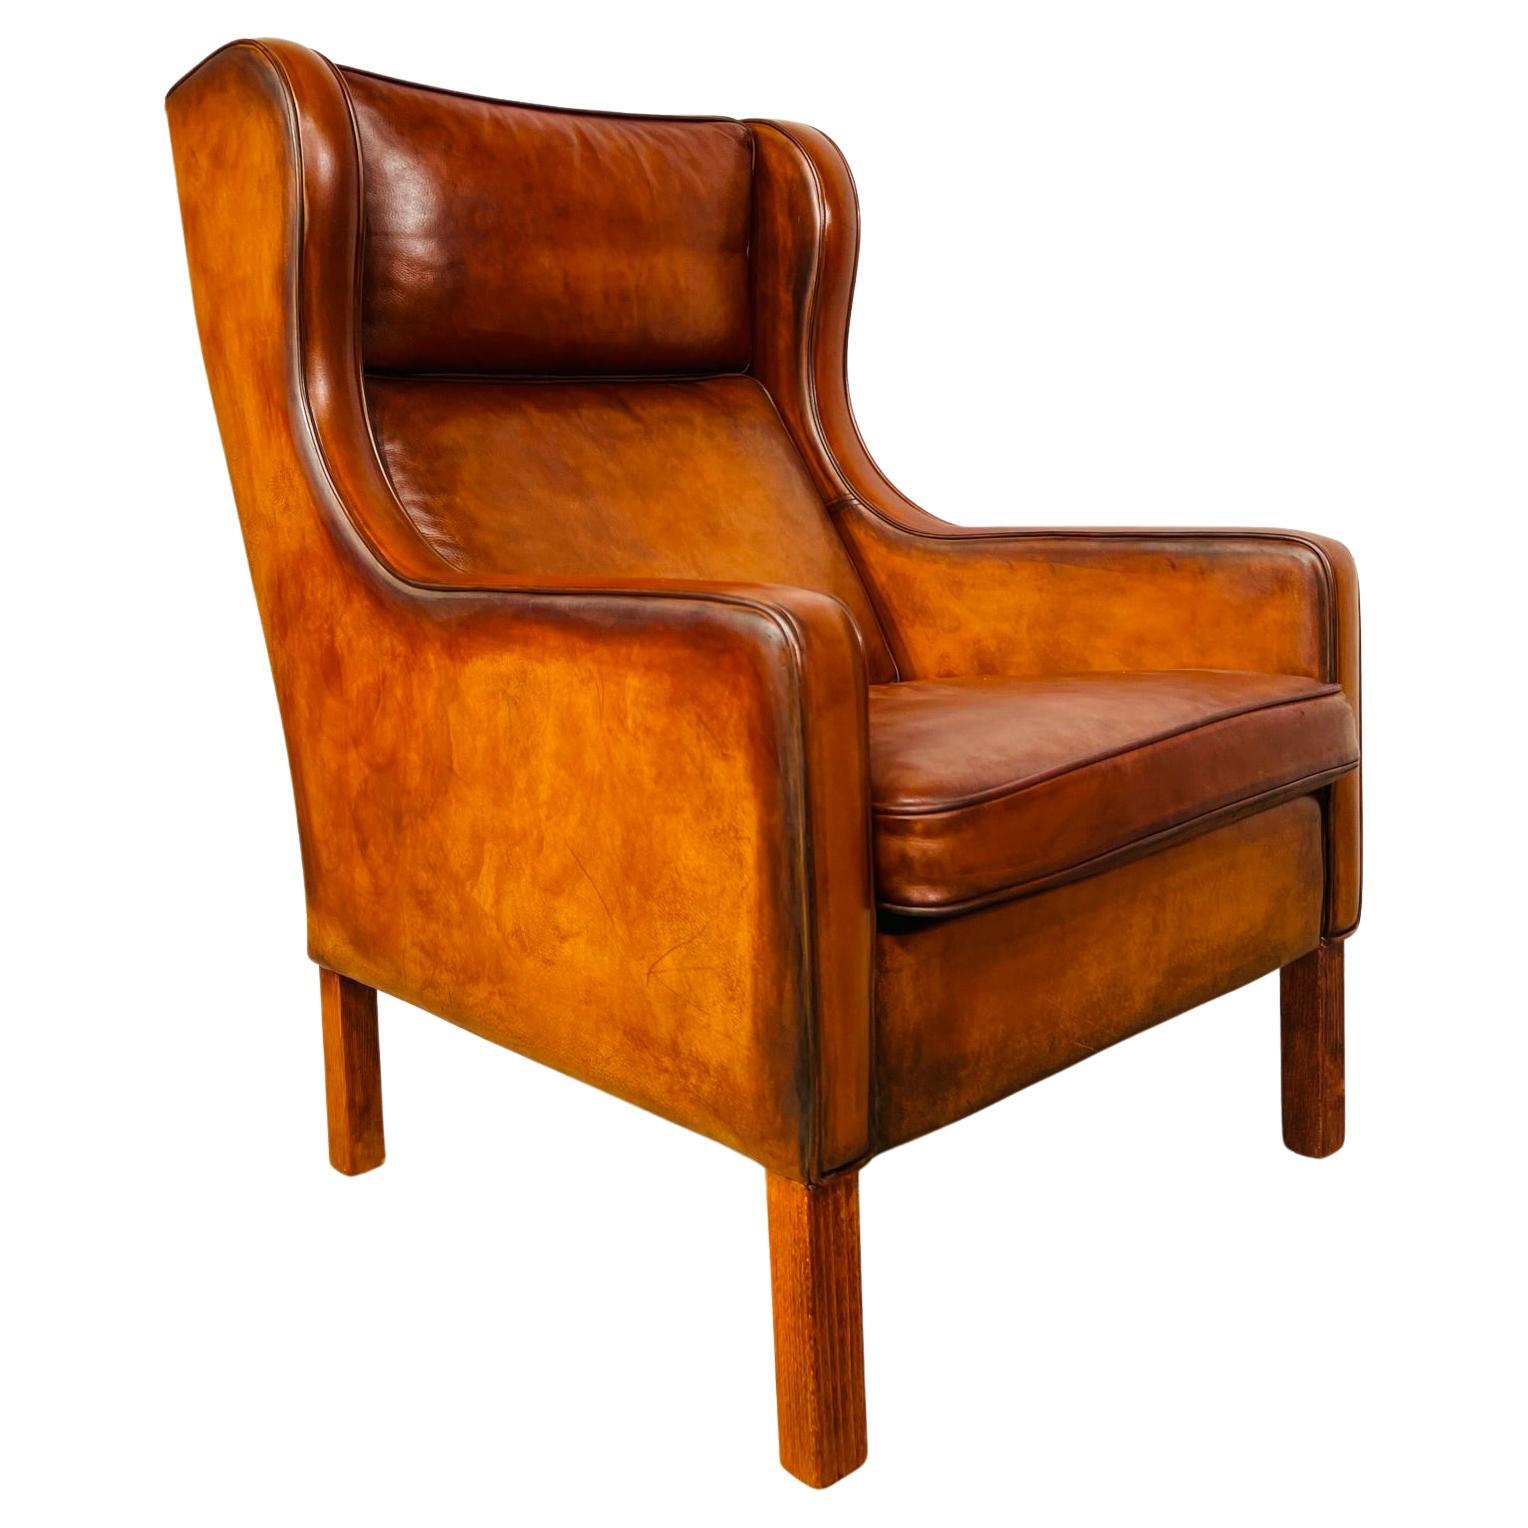 Elegant Vintage Danish 70s Leather Chair Wingback Armchair #654 For Sale